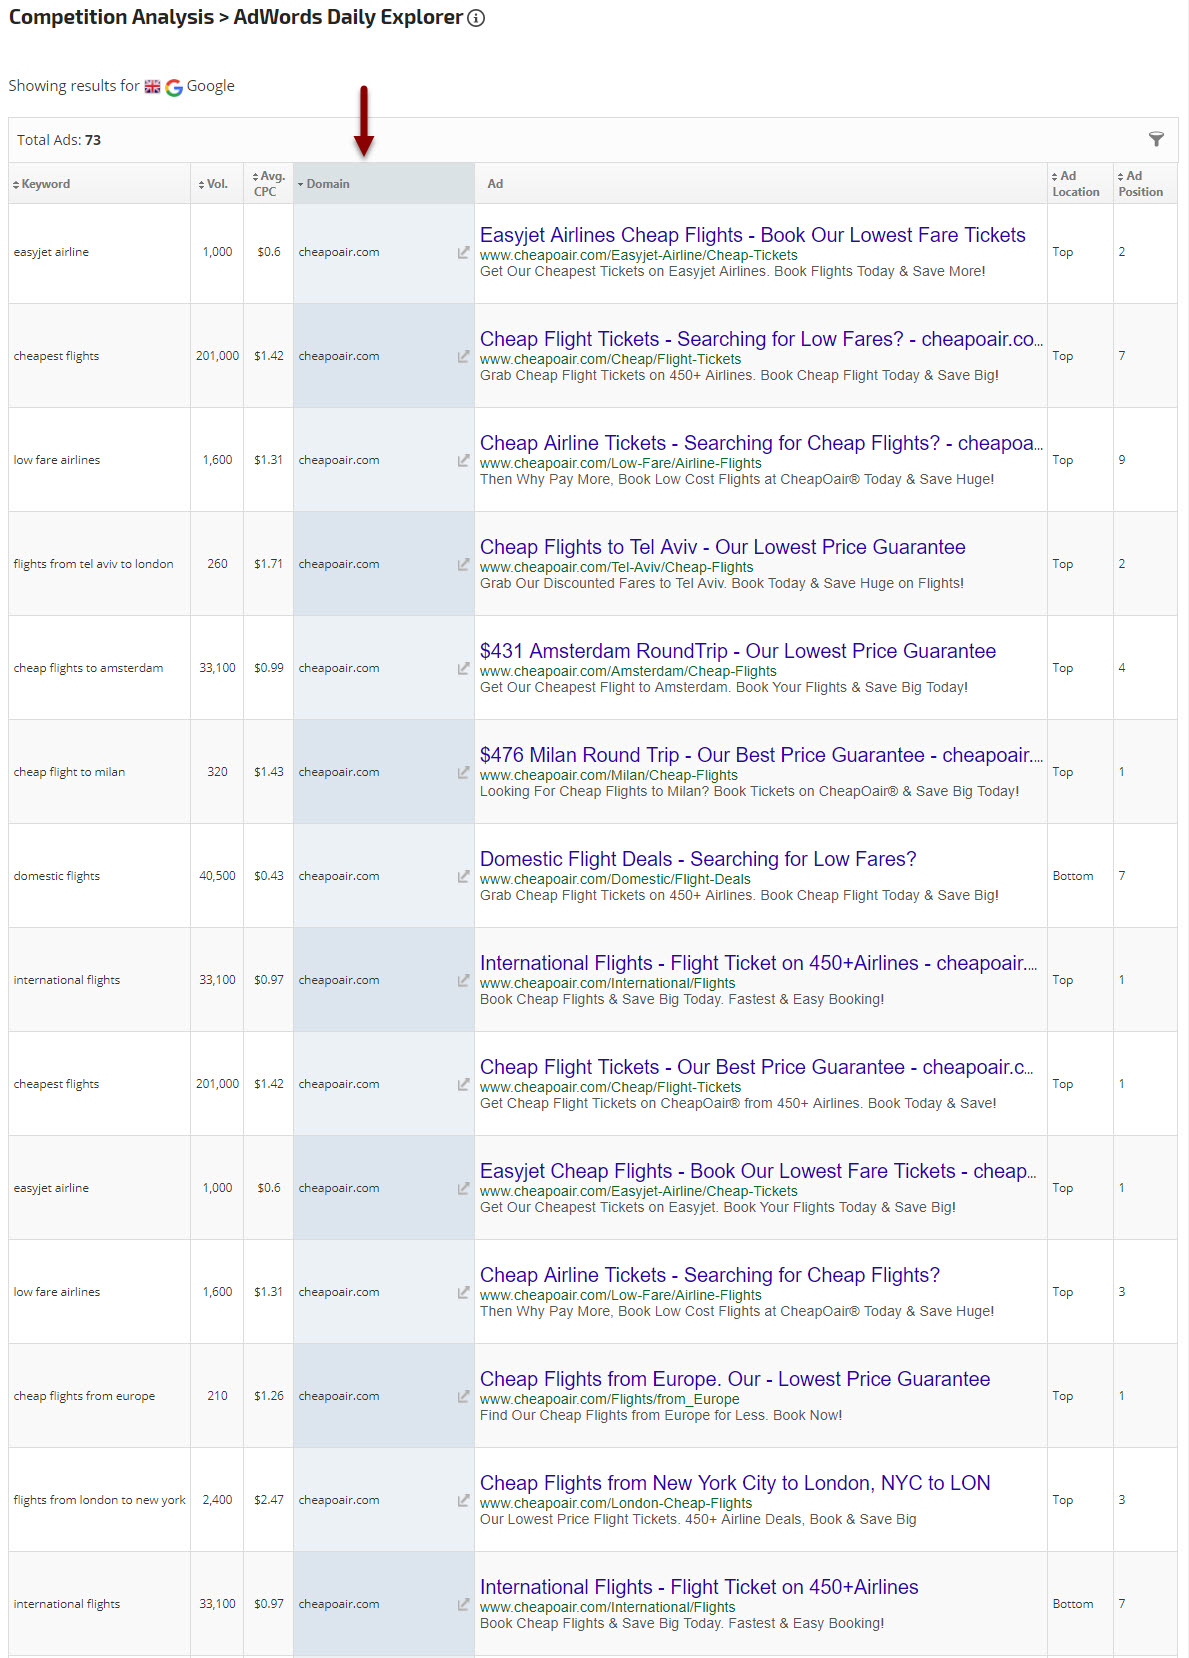 AdWords results sorted by domain